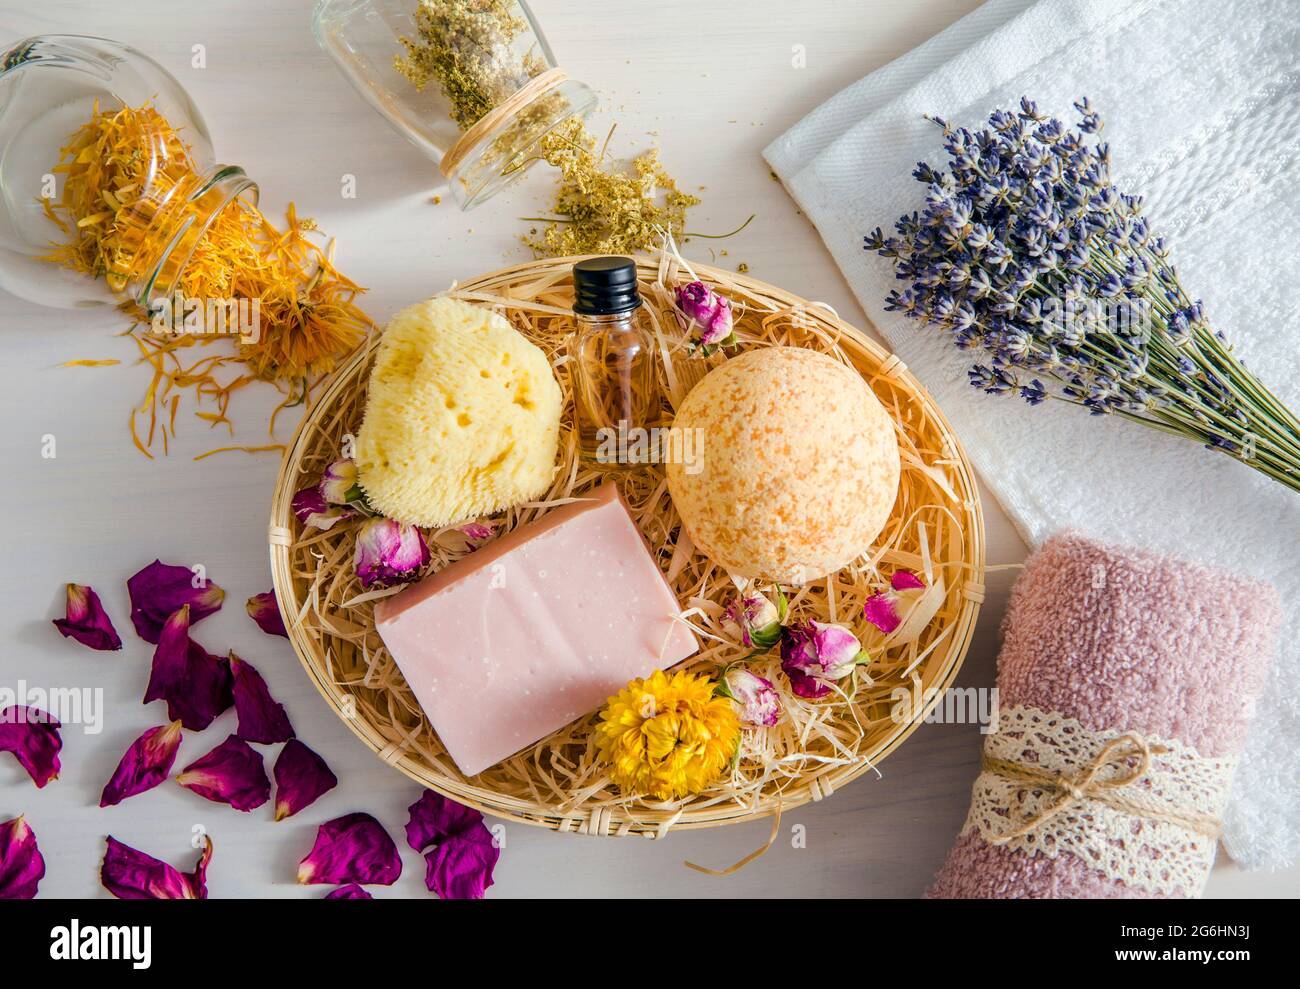 Different natural dried herbs flower petals used in beauty bath products concept. Top view of bath bomb, natural sea sponge, bar of soap, aroma oil bo Stock Photo